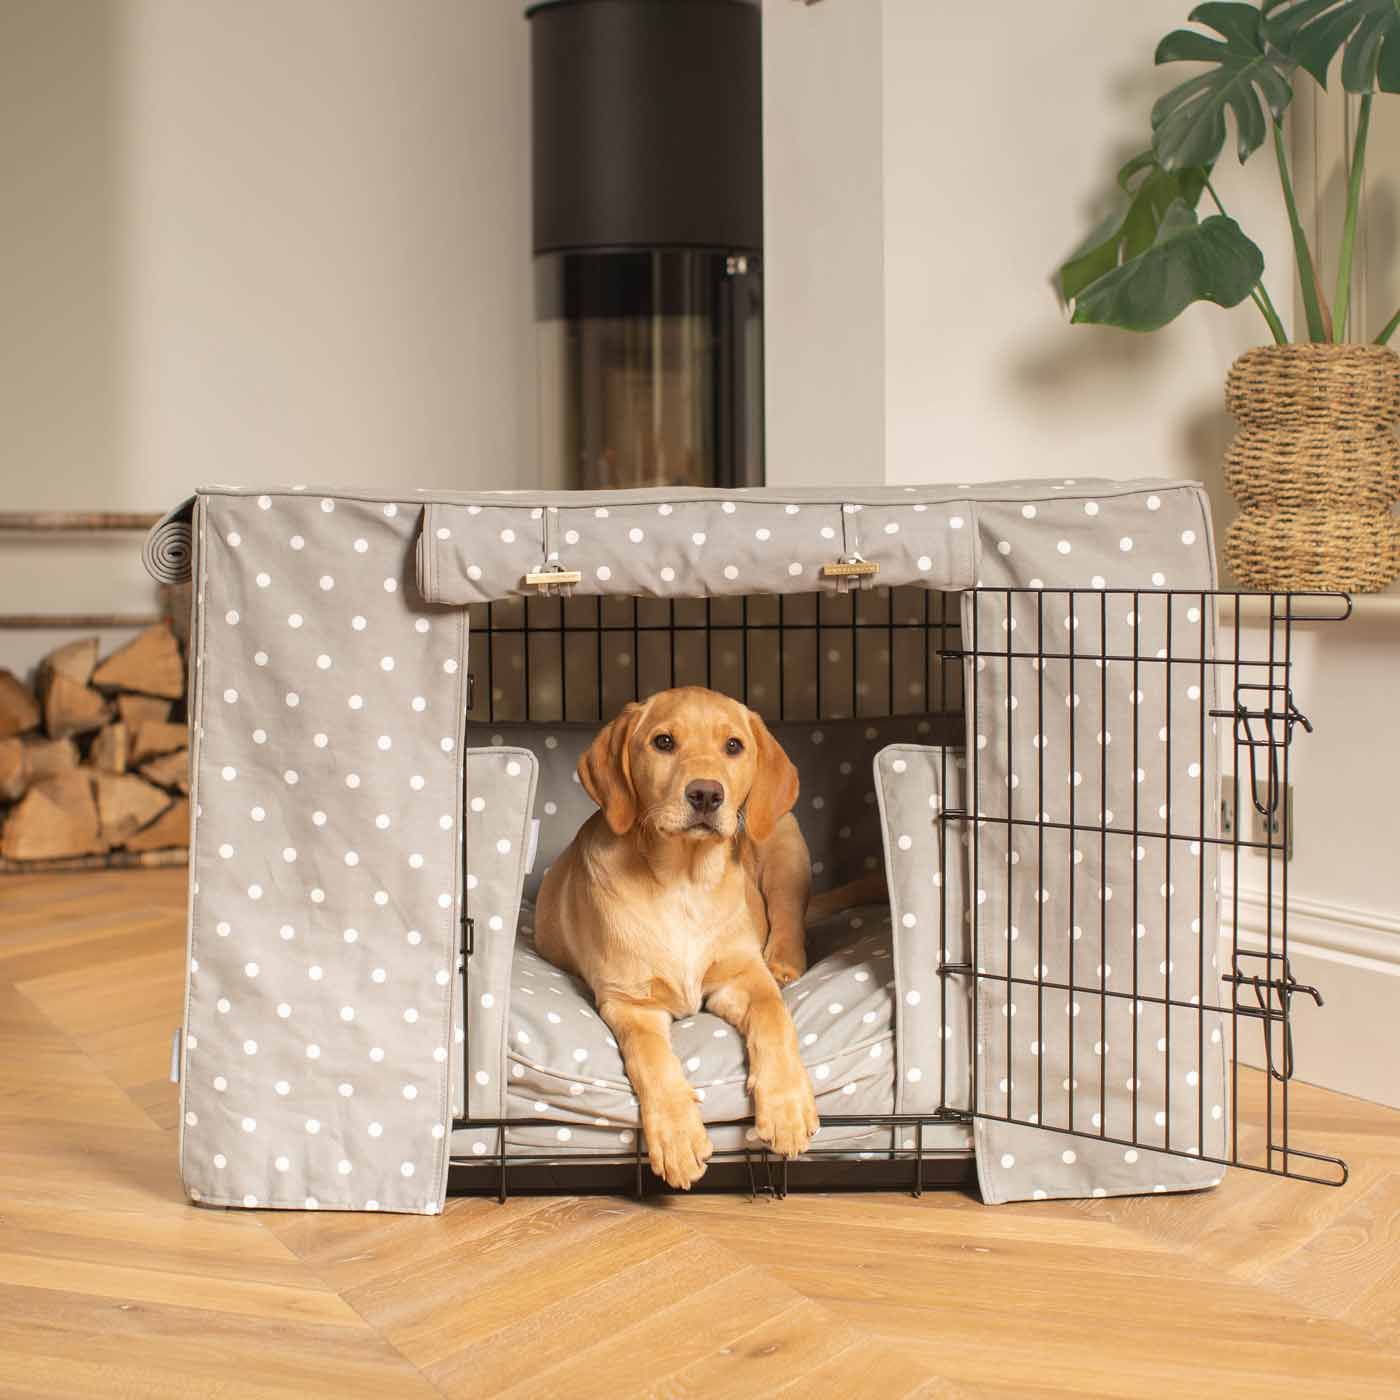 Luxury Heavy Duty Dog Crate, In Stunning Grey Spot Crate Set, The Perfect Dog Crate Set For Building The Ultimate Pet Den! Dog Crate Cover Available To Personalise at Lords & Labradors